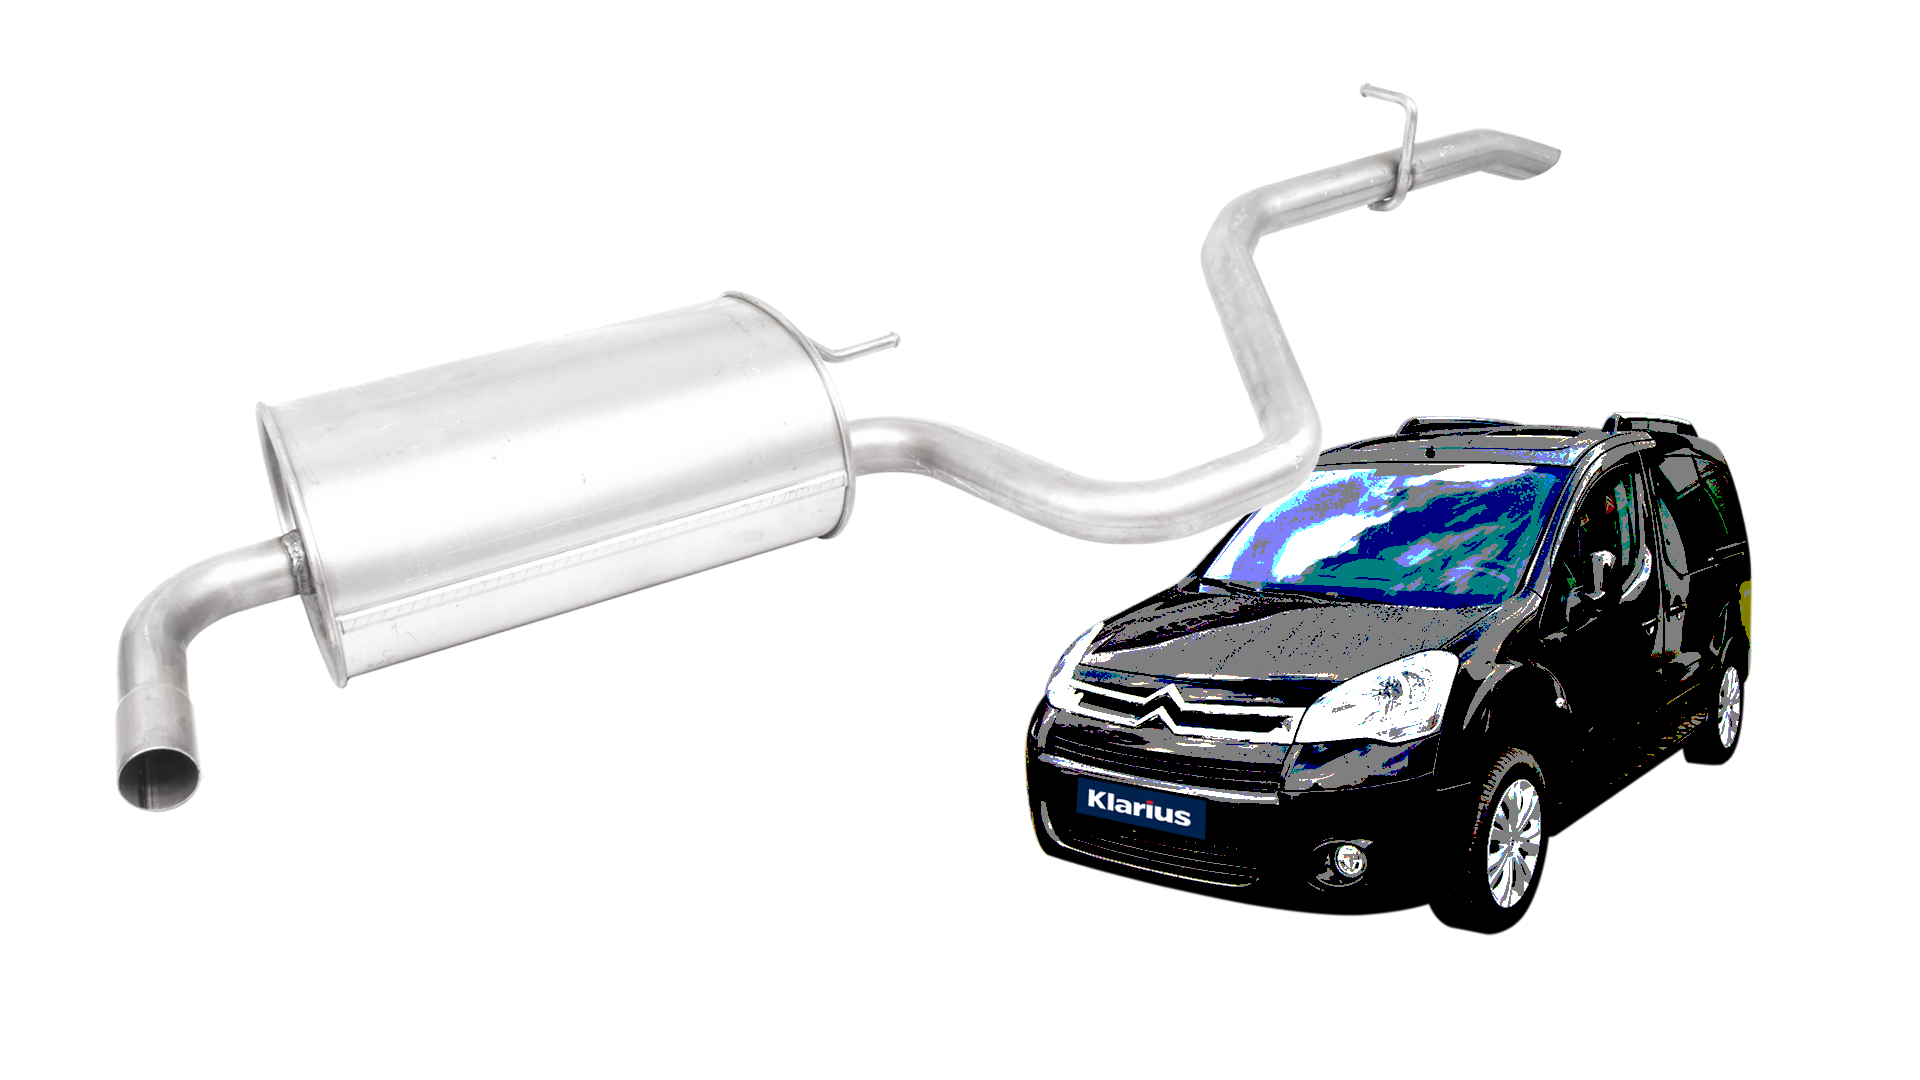 Klarius supports exhaust repairs for the Citroën Berlingo in new parts release